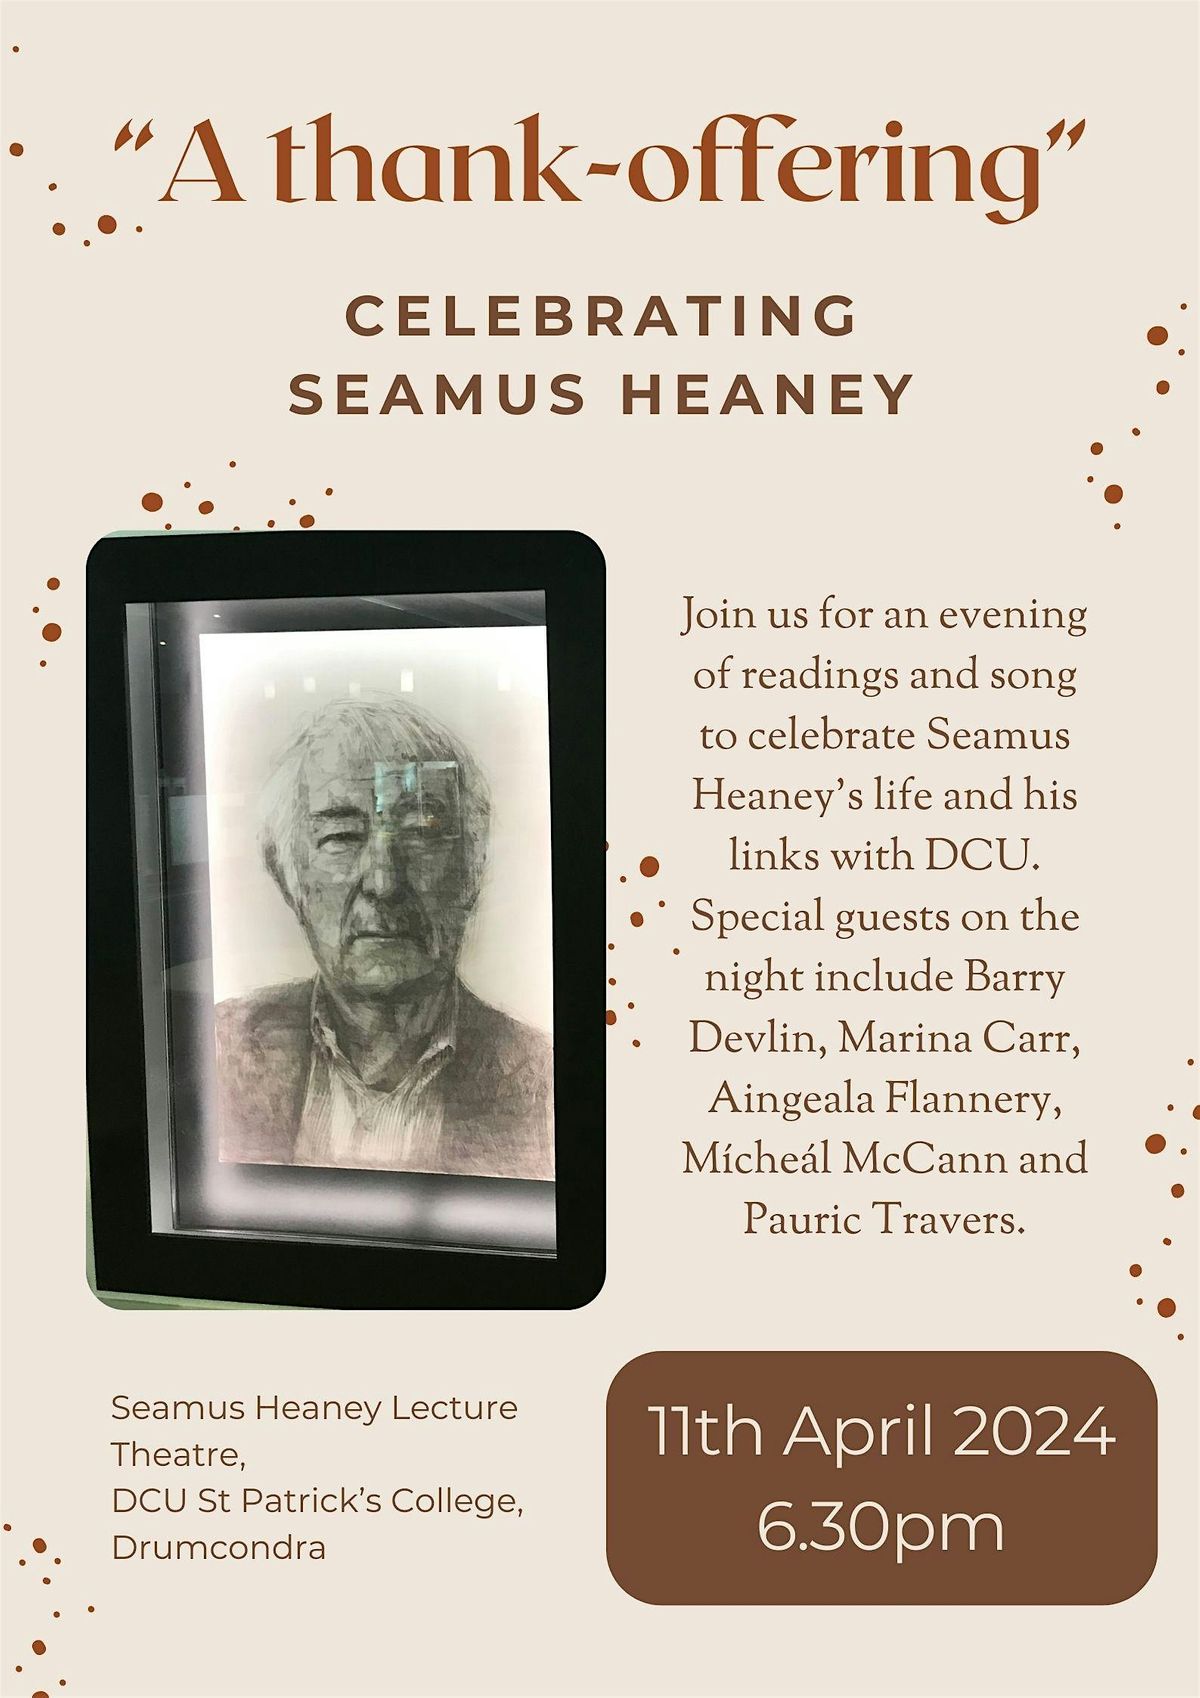 "A thank-offering": Celebrating Seamus Heaney